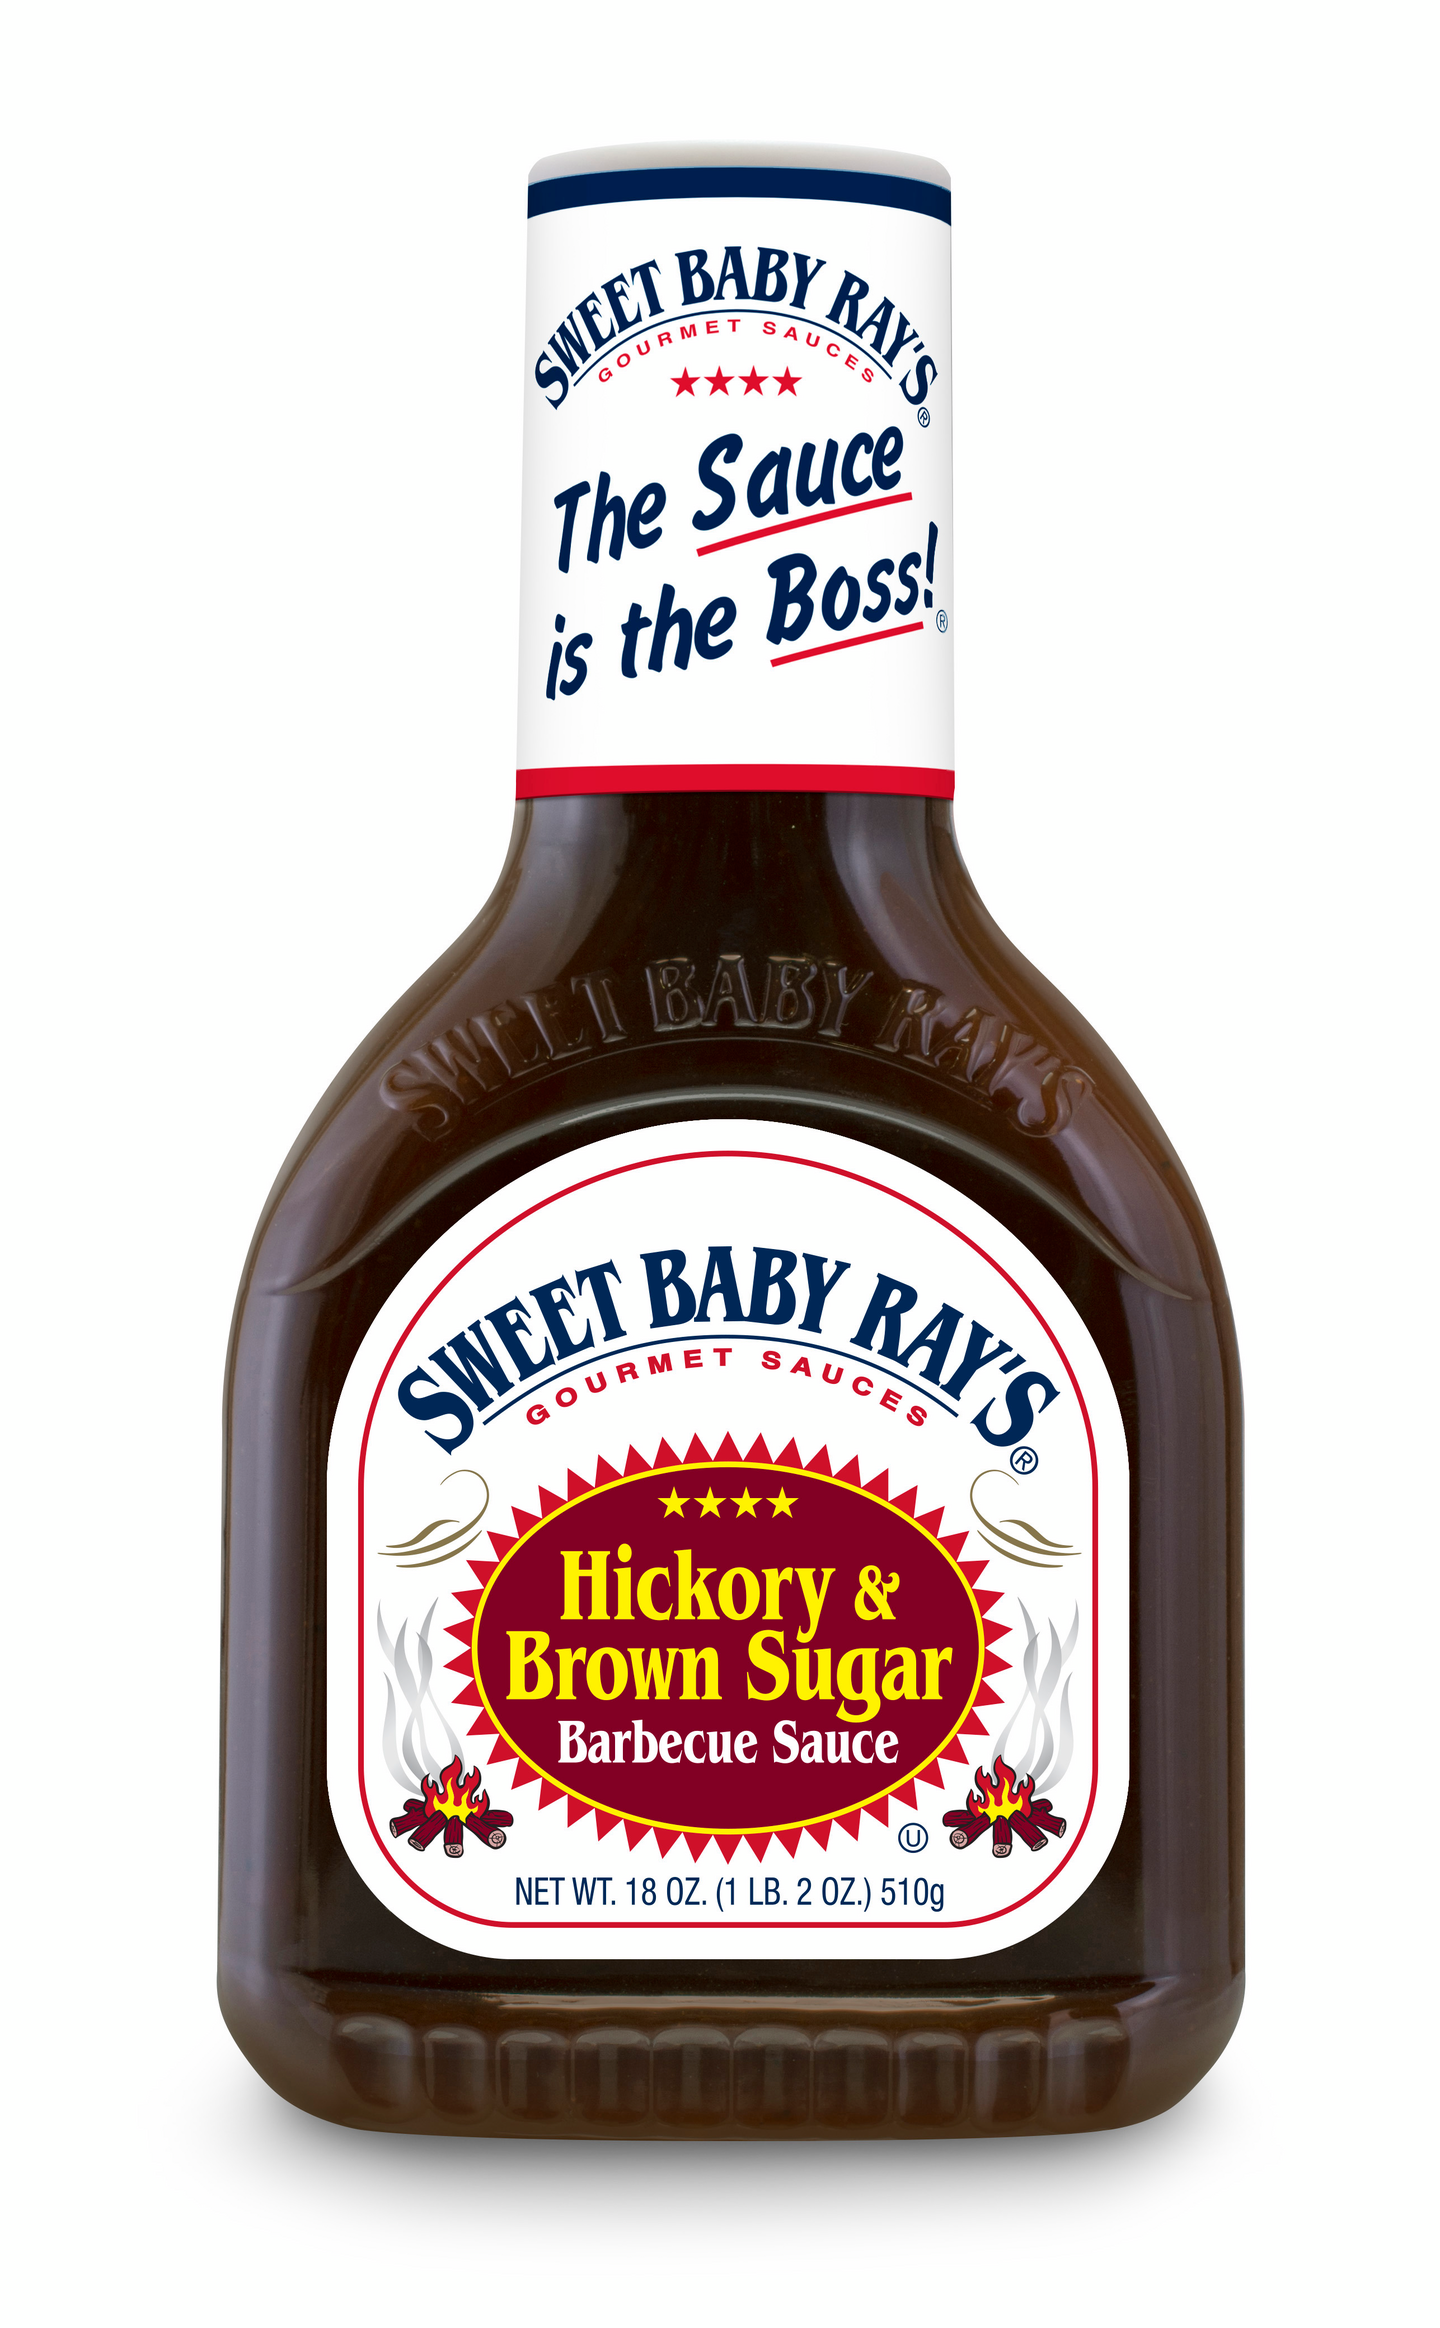 Sweet Baby Ray's BBQ kastike 510g Hickory